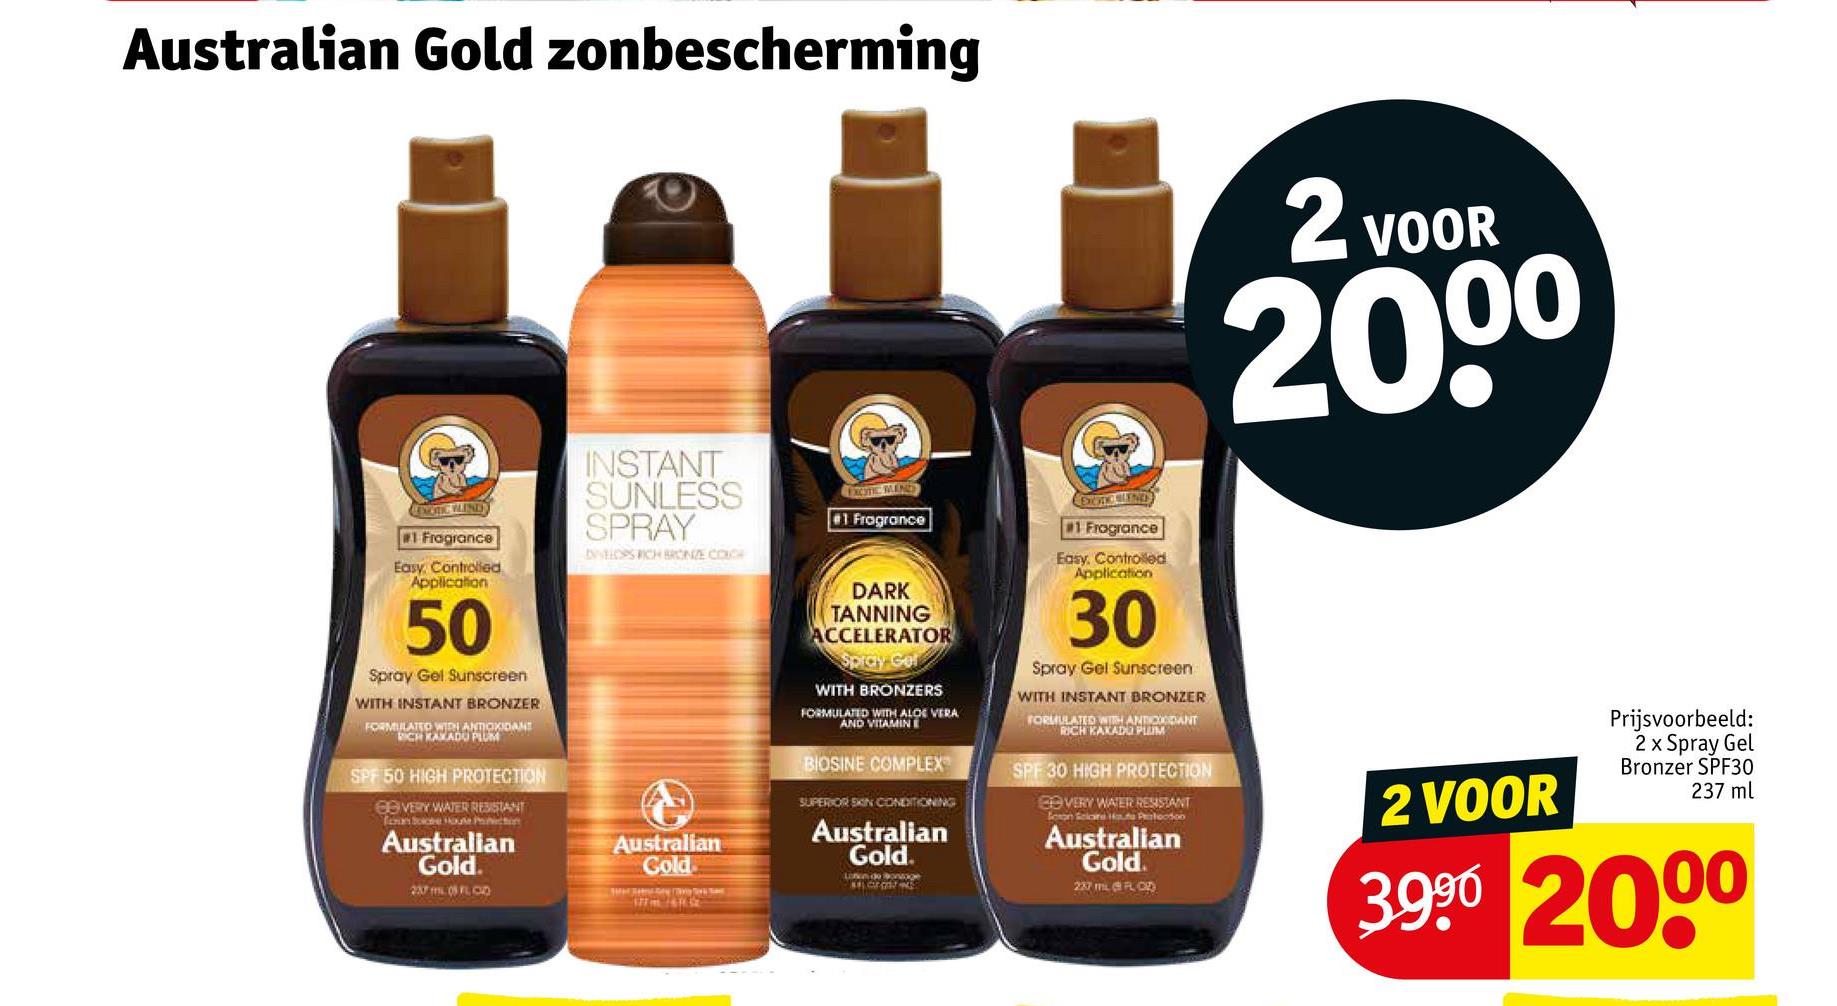 Australian Gold zonbescherming
CHOTIC WIND
#1 Fragrance
Easy, Controlled
Application
50
Spray Gel Sunscreen
WITH INSTANT BRONZER
FORMULATED WIR ANTIOXIDANT
RICH KAKADU PLUM
SPF 50 HIGH PROTECTION
VERY WATER RESISTANT
Tan boce House Priction
Australian
Gold.
237 m. 08 FLCD
INSTANT
SUNLESS
SPRAY
DEVELOPS RICH BRONZE COUCH
Australian
Cold
THAT TANSAN (TRY THASHE
177m 161 32
EXCITIC MAND
#1 Fragrance
DARK
TANNING
ACCELERATOR
Spray Get
WITH BRONZERS
FORMULATED WITH ALOE VERA
AND VITAMINE
BIOSINE COMPLEX
SUPERIOR SKIN CONDITIONING
Australian
Gold.
-
Lonen de onge
Margar
EXORCELENCE
#1 Fragrance
Easy, Controlled
Application
30
Spray Gel Sunscreen
WITH INSTANT BRONZER
FORMULATED WITH ANTICODANT
RICH KAKADU PLUM
SPF 30 HIGH PROTECTION
COVERY WATER RESISTANT
Soon Selar Hot Ptecton
Australian
Gold.
237 mL FLOD
2 VOOR
20⁰⁰
Prijsvoorbeeld:
2 x Spray Gel
Bronzer SPF30
237 ml
2 VOOR
3.9⁹0 2000